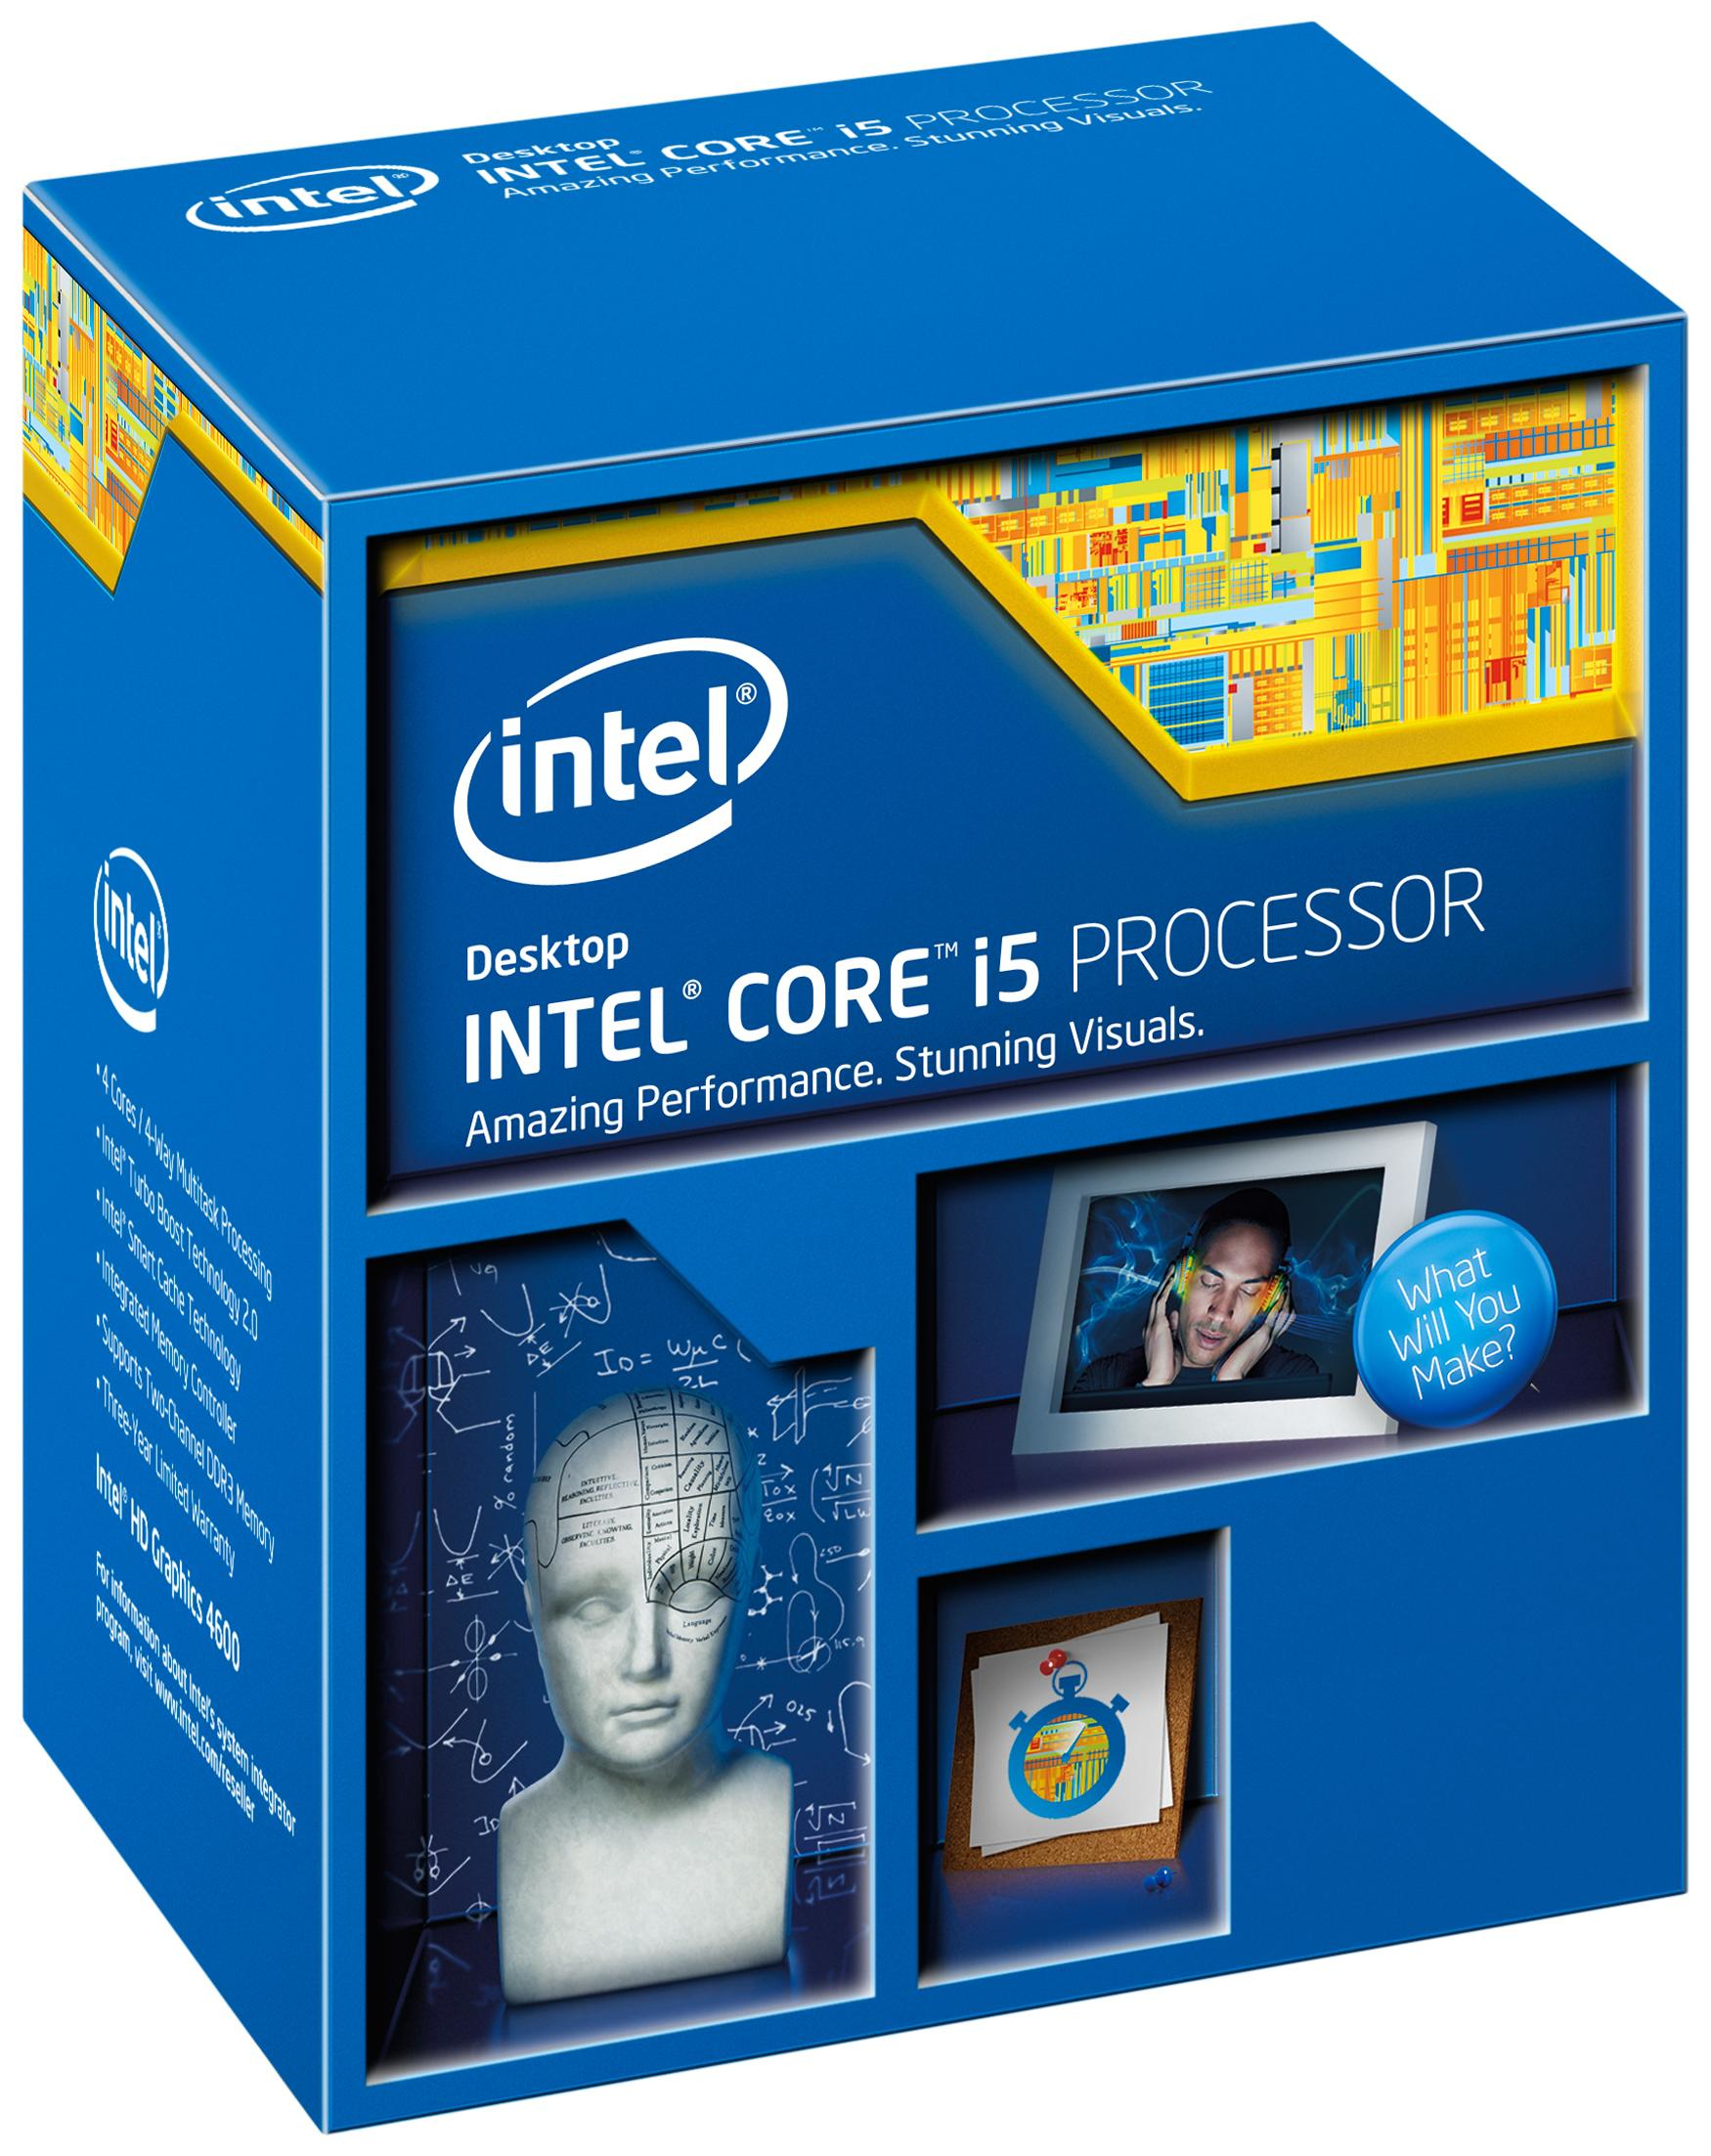 Intel Core i5-4440, 4C/4T, 3,1/3,3 GHz, 6 MB, 84 W, S1150, HD Graphics 4600, 350/1100, - TWEEDEHANDS pulled